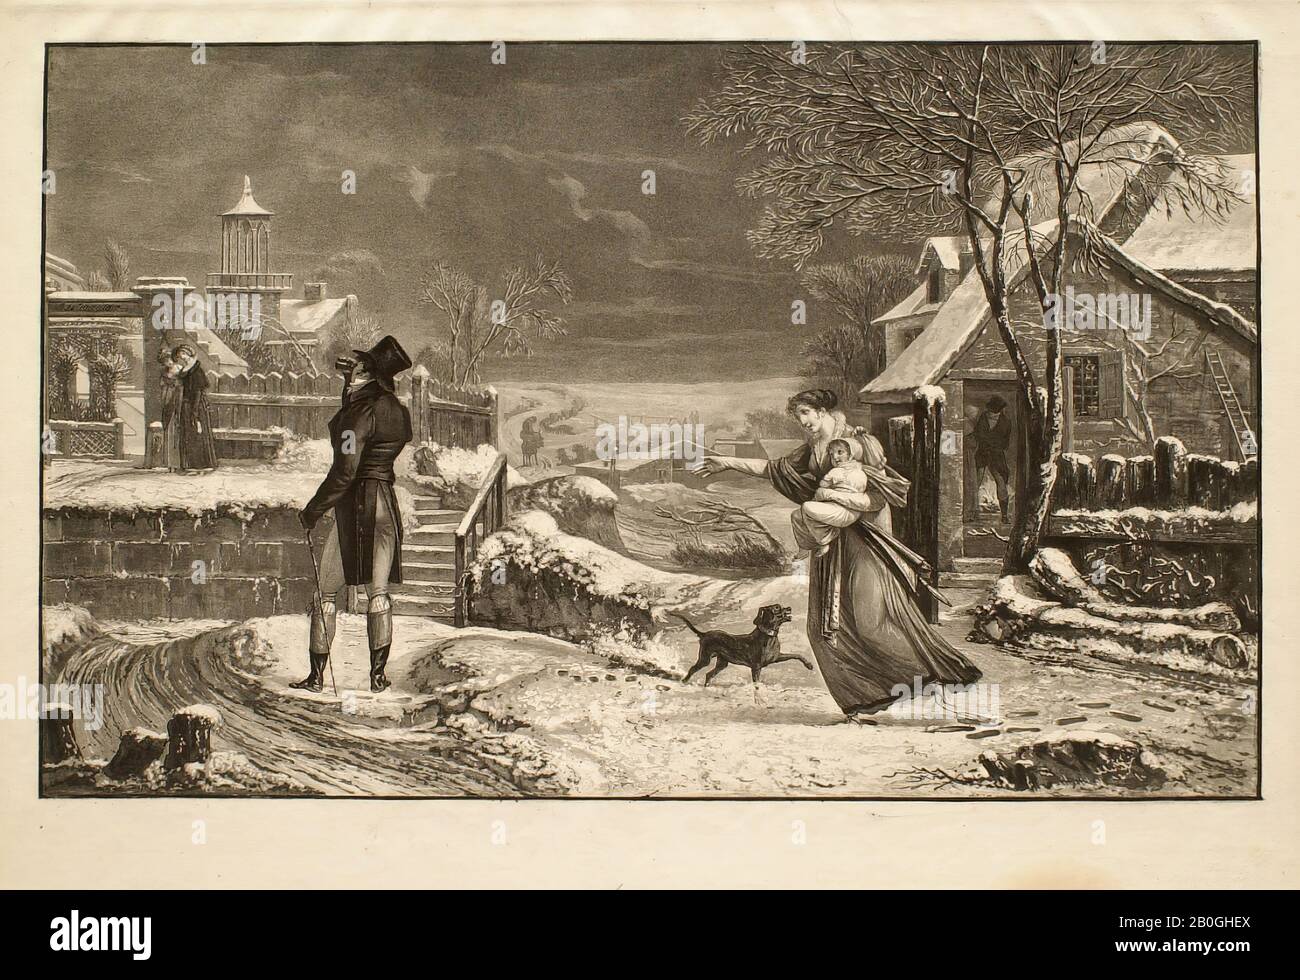 Philibert  Louis Debucourt, French, 1755-1832, L'Hiver, ou, Le Mari, 1808, Aquatint and etching on paper, Border: 12 3/8 x 19 15/16 in. (31.5 x 50.6 cm Stock Photo